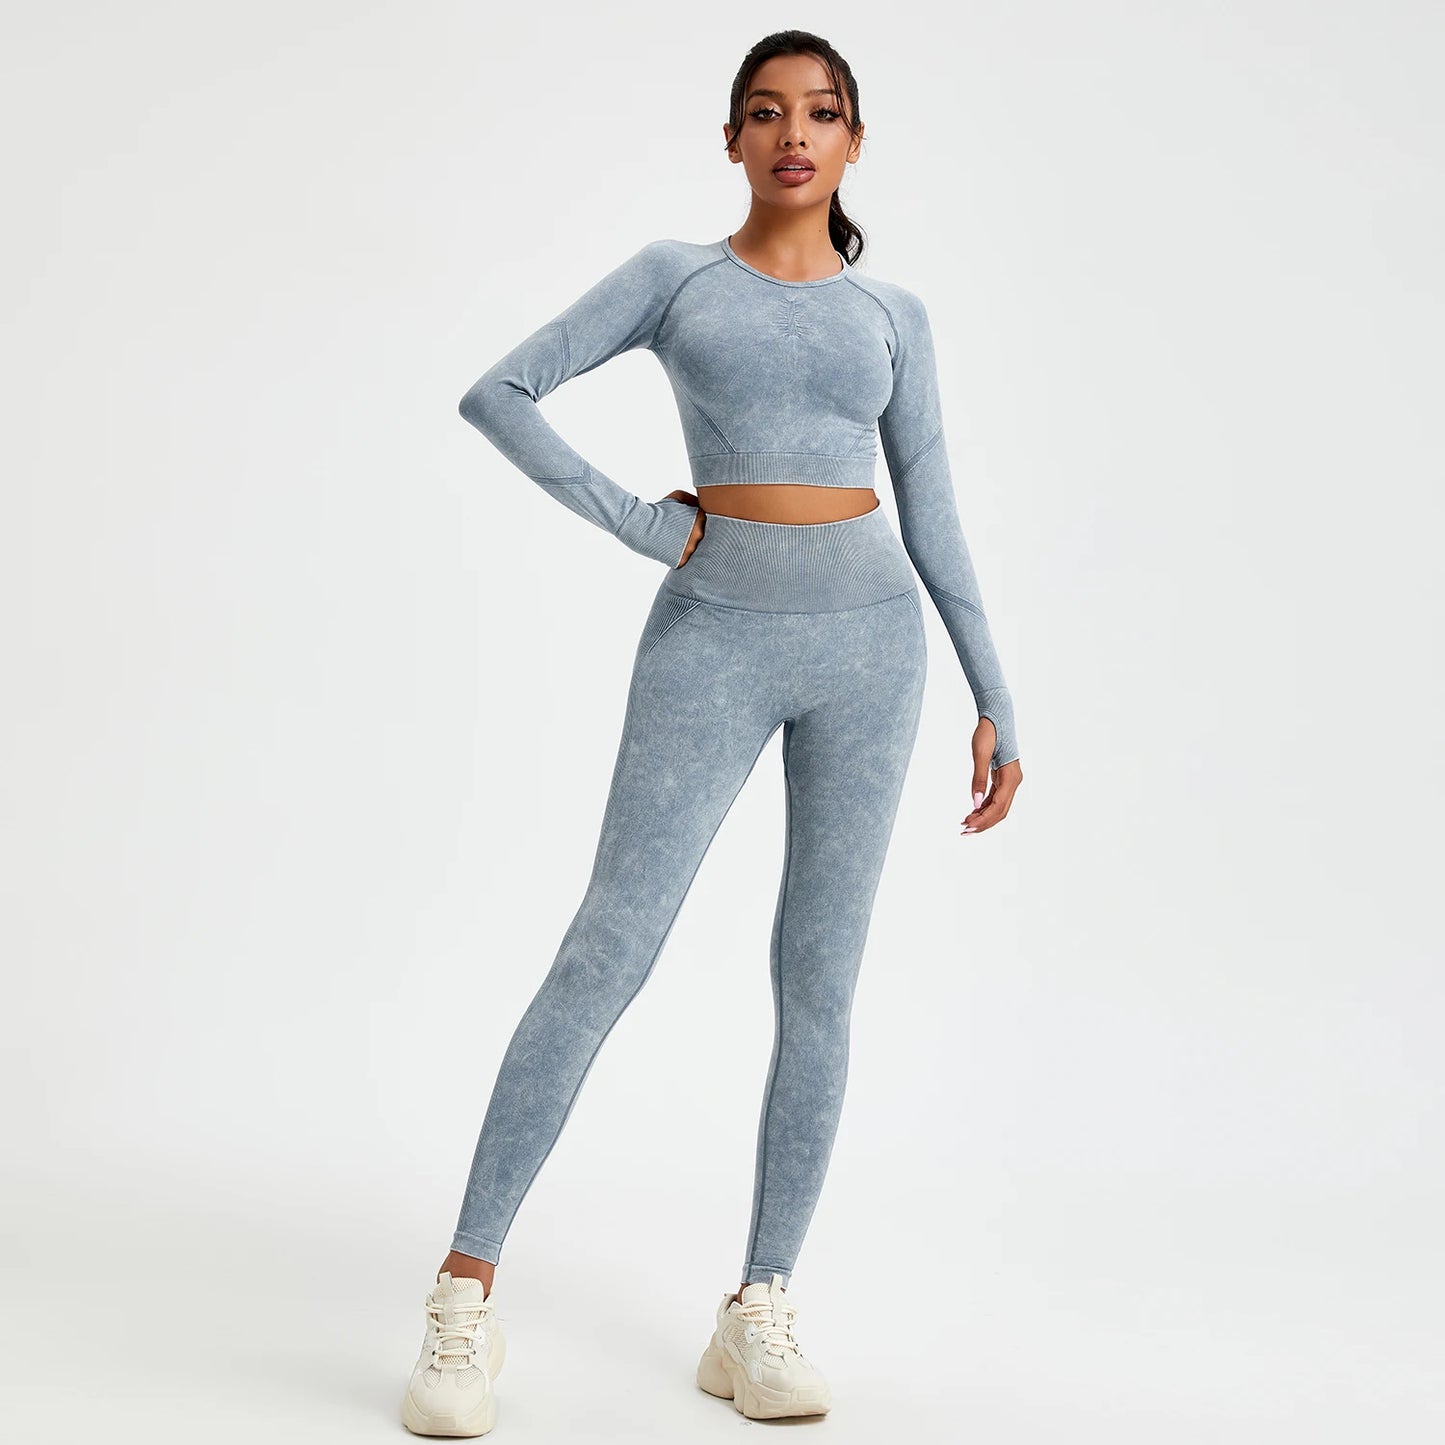 Women’s skinny stretch active pant set